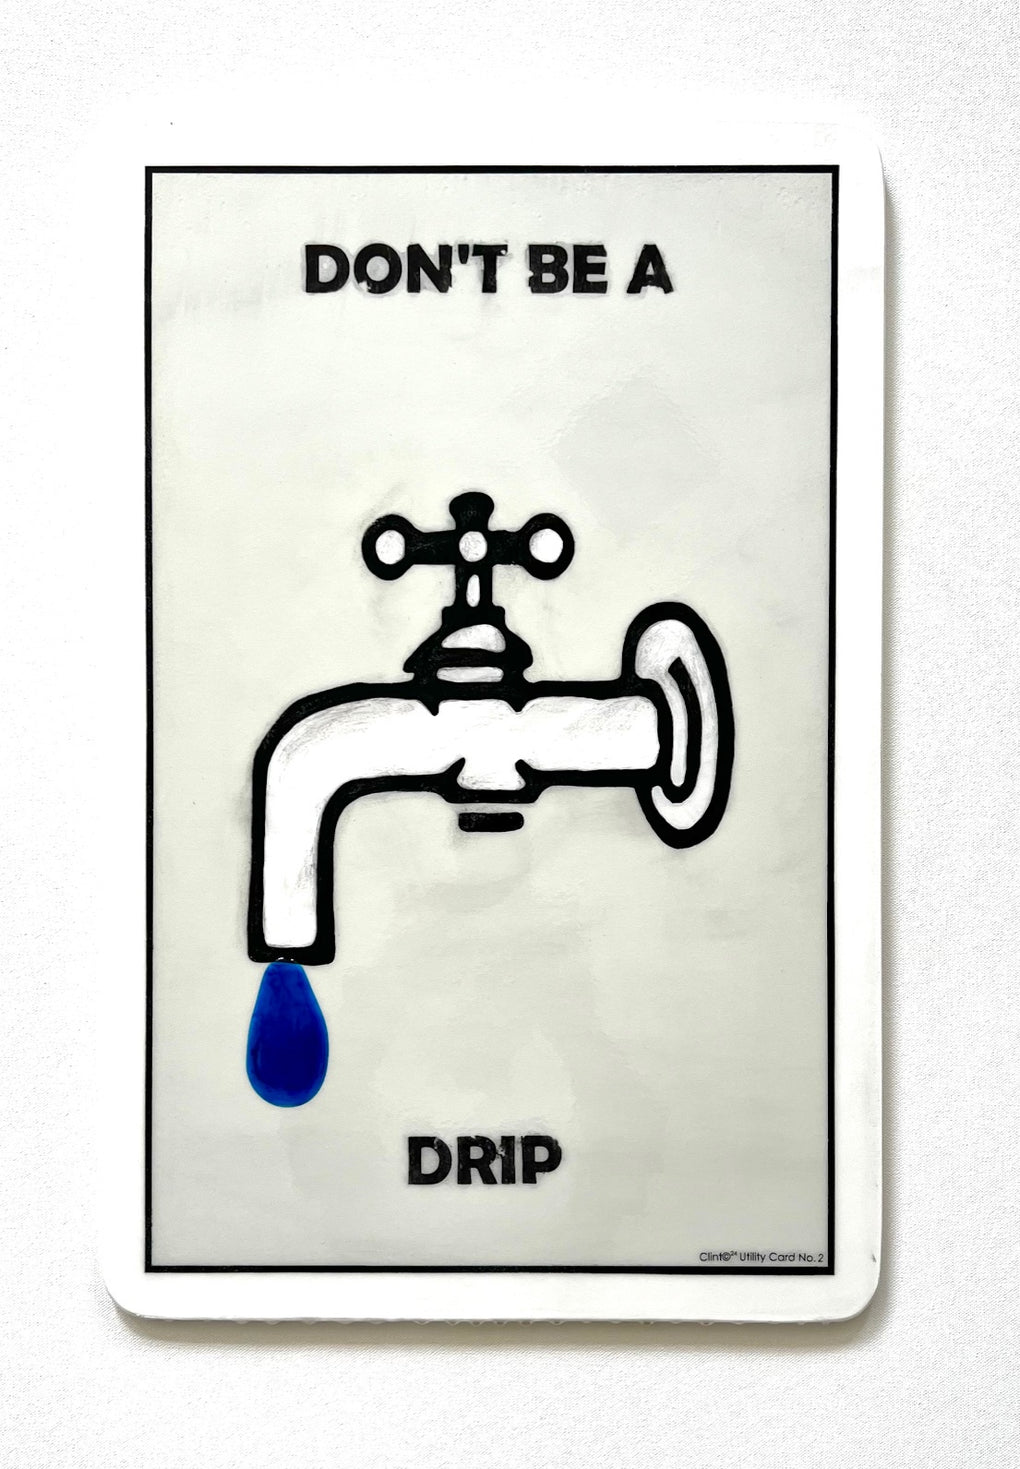 Don't be a drip